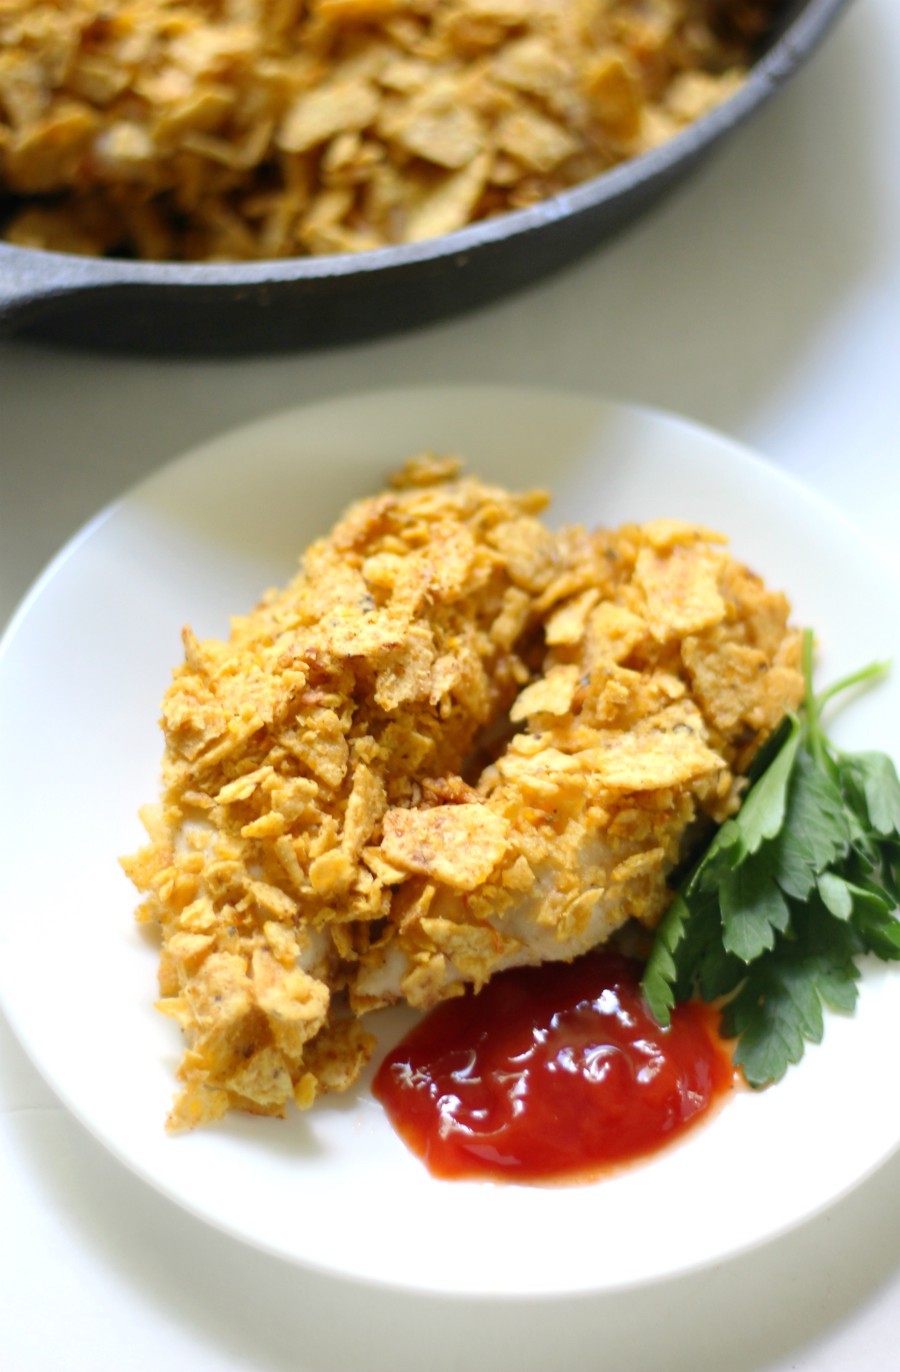 Gluten-Free Tortilla Chip Crusted Chicken Tenders (Allergy-Free) | Strength and Sunshine @RebeccaGF666 Chicken tenders you can feel good about feeding the kids! These healthy Gluten-Free Tortilla Chip Crusted Chicken Tenders are top 8 allergy-free, require no oil, and are baked in the oven. This easy, crispy, crunchy coating with a kick of spice will be your new go-to dinner recipe!